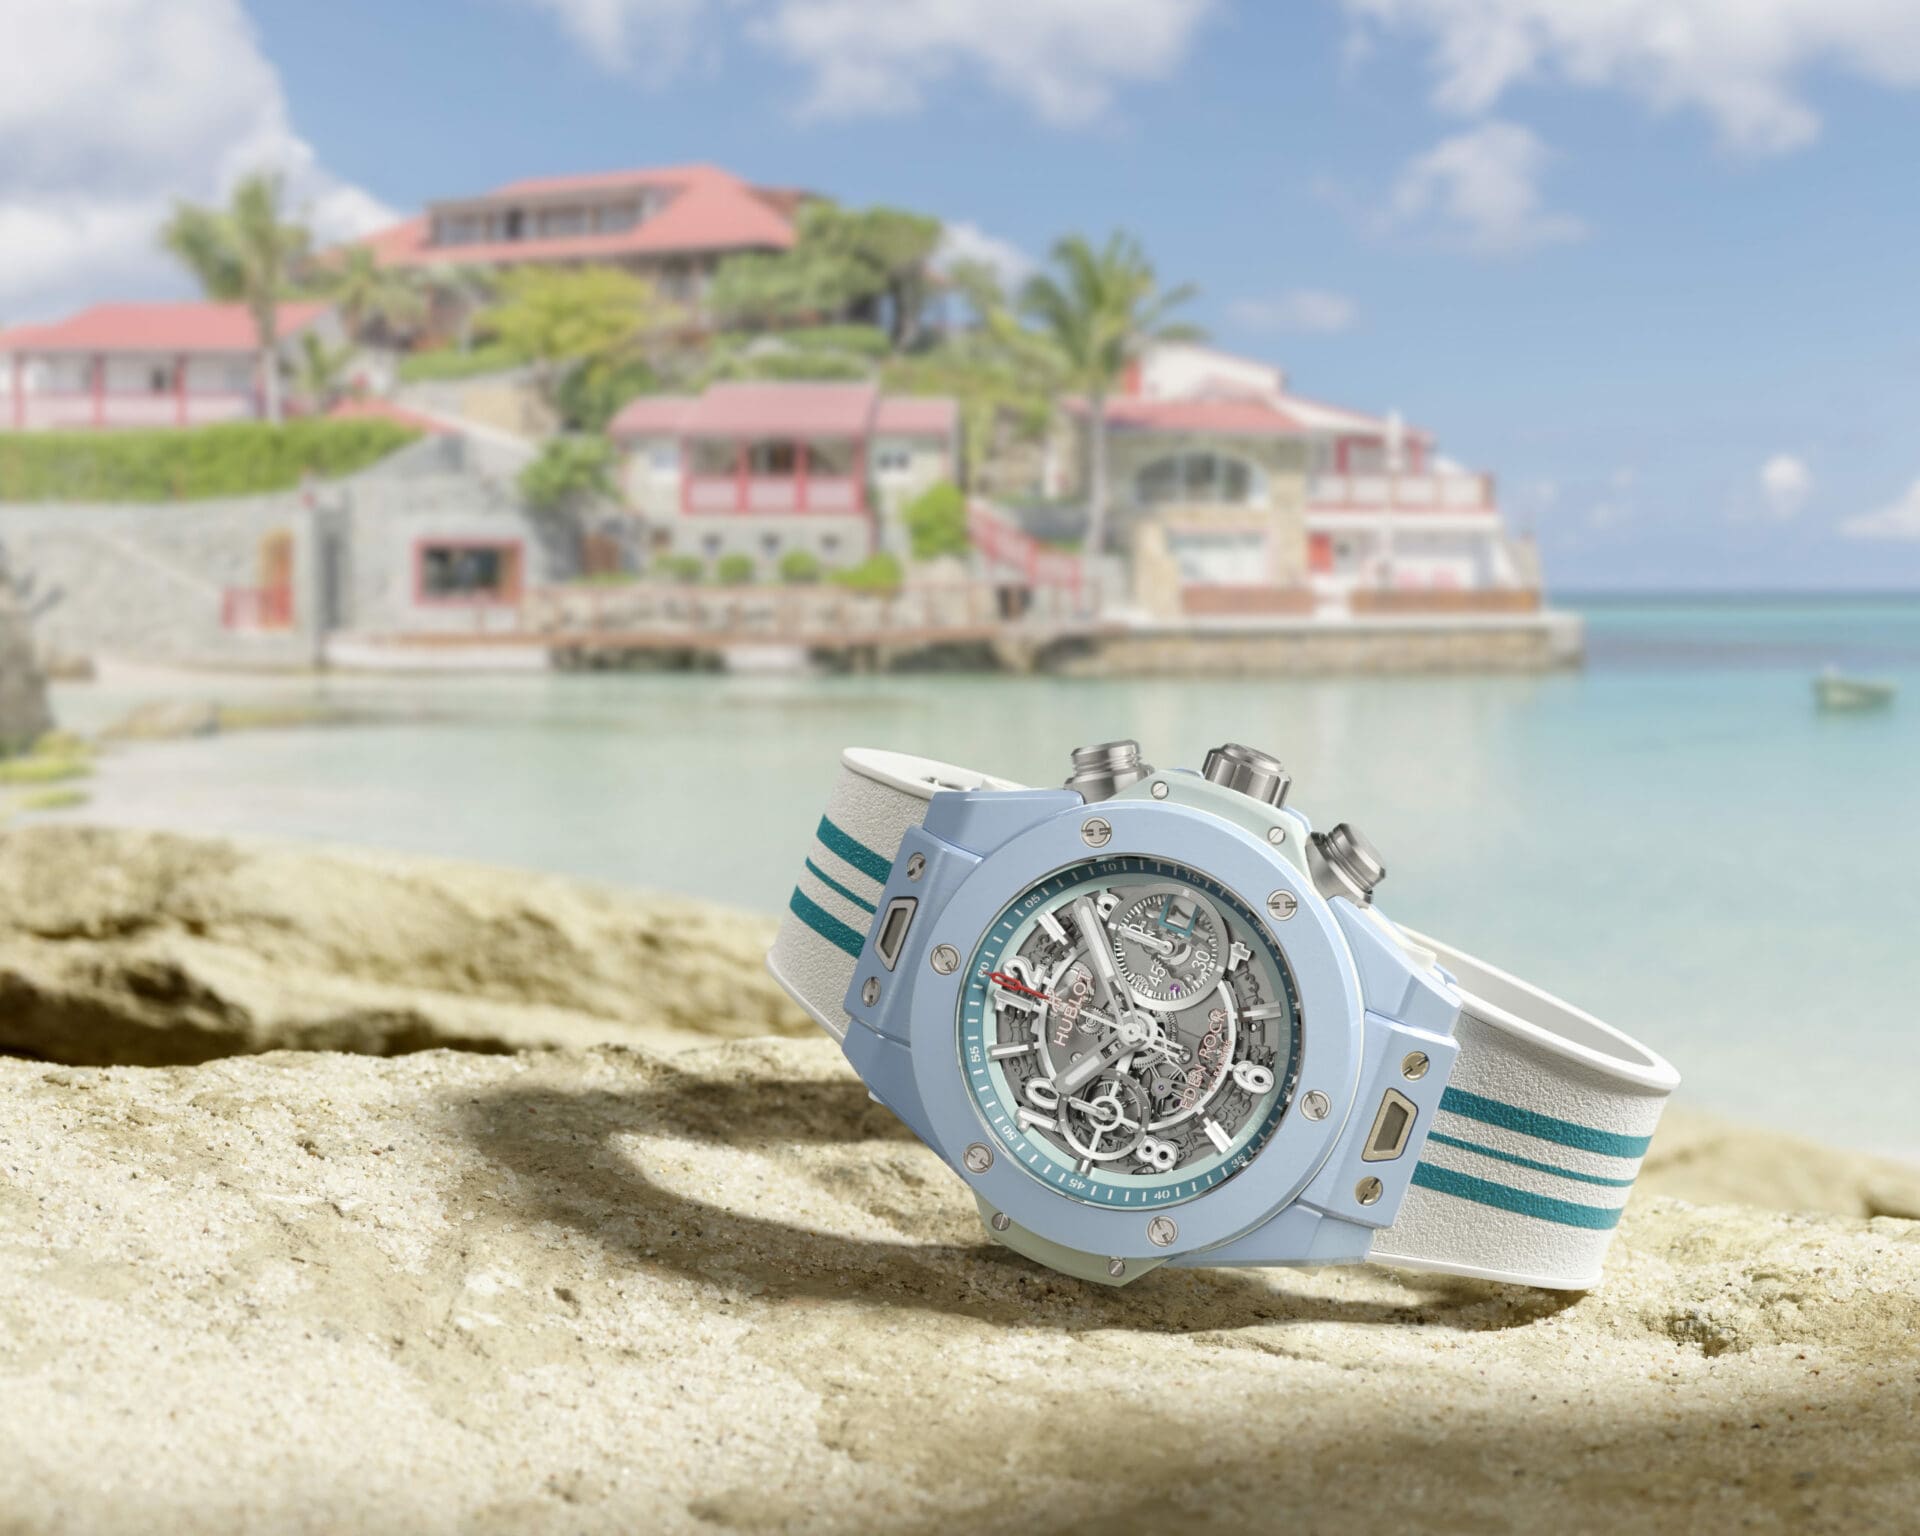 INTRODUCING: The Hublot Big Bang Unico Eden Rock St Barths is an even more limited twist on the Unico Sky Blue